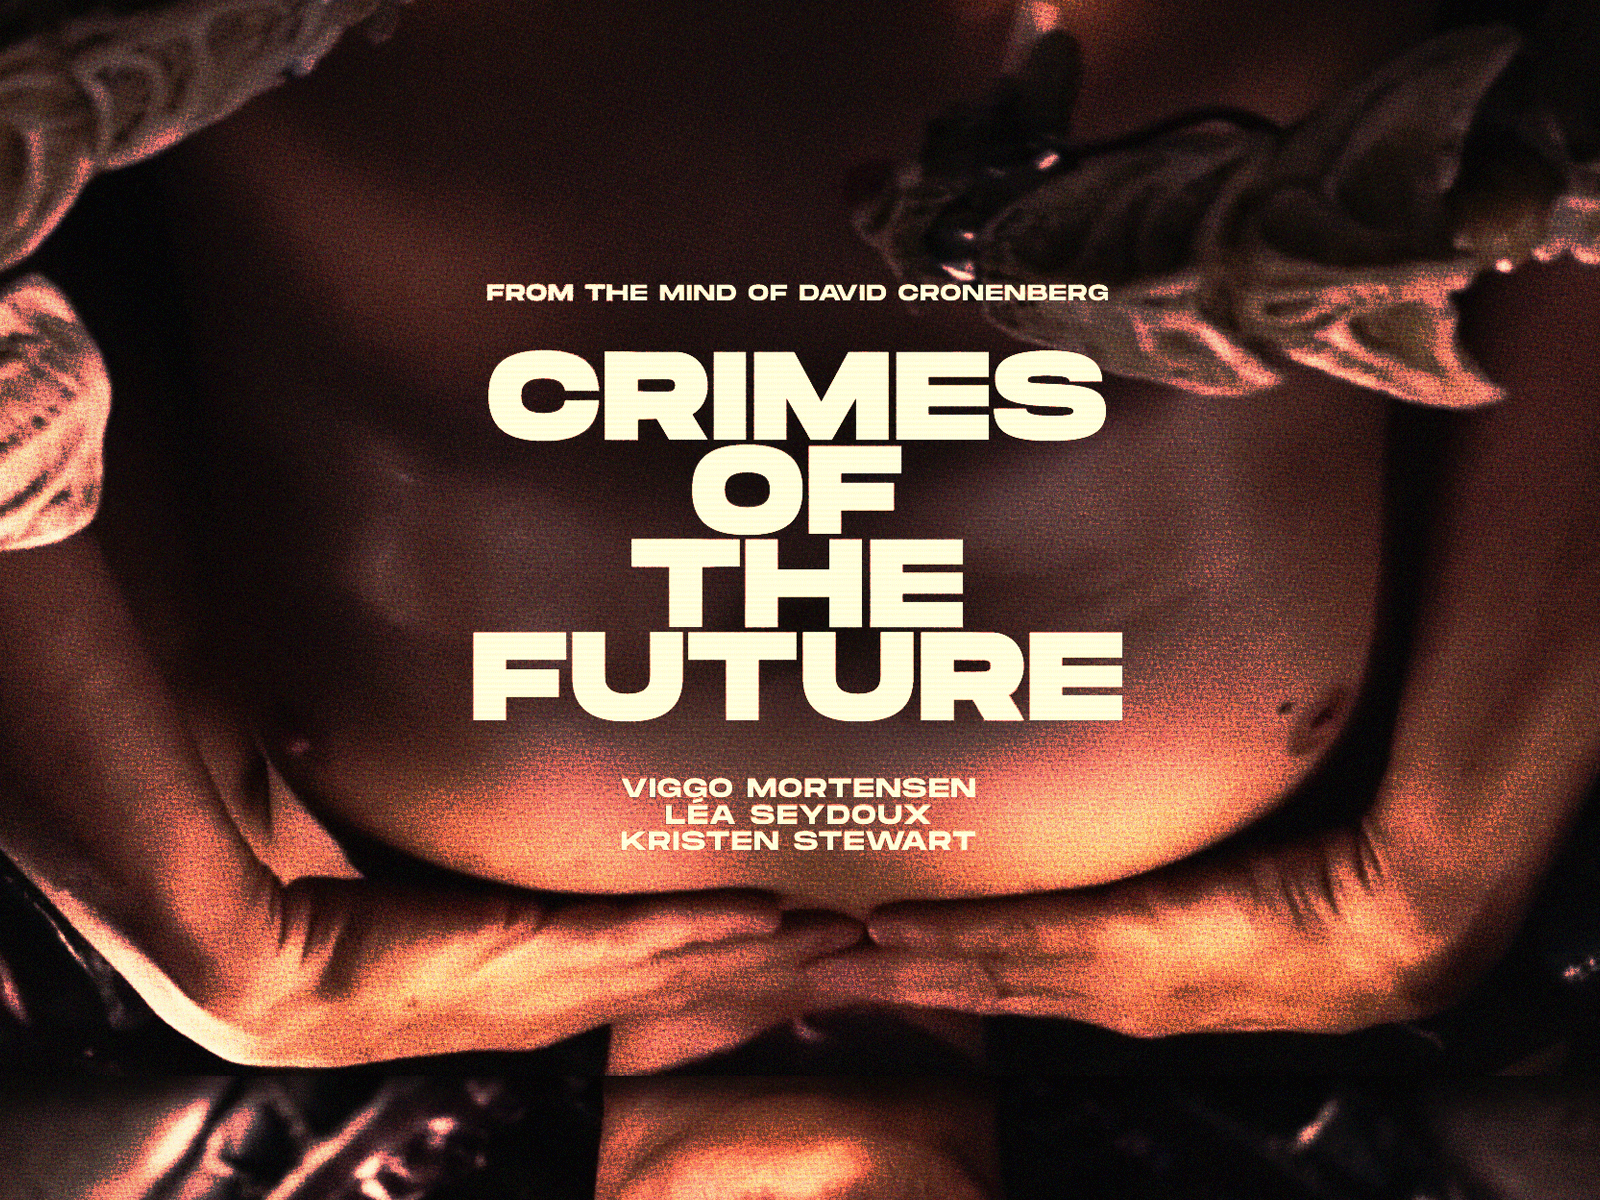 Crimes of the Future body horror david cronenberg future horror key art movie poster movie posters poster poster design posters